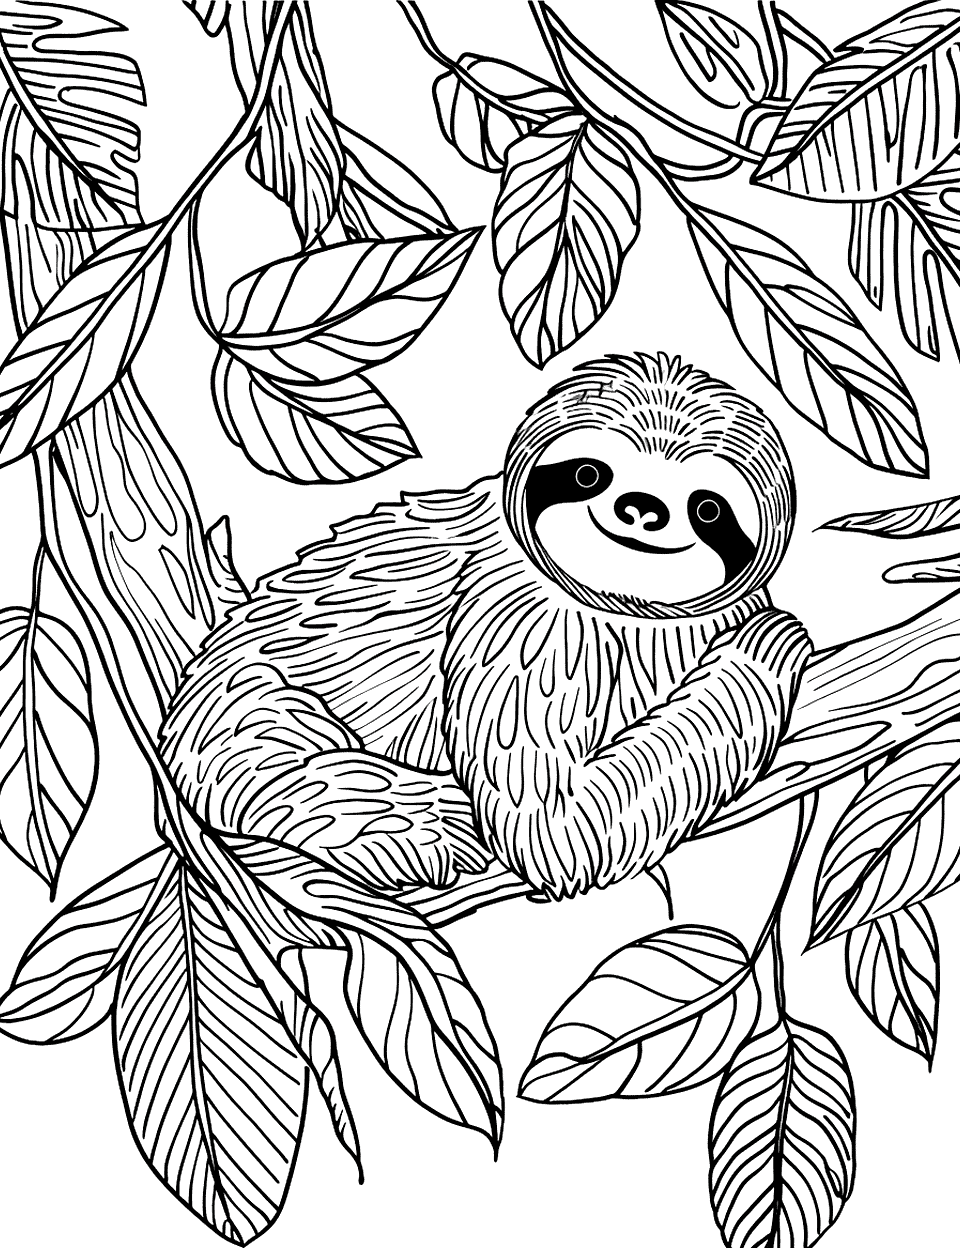 Rainforest Sloth in a Tree Coloring Page - A serene scene of a sloth nestled comfortably among lush rainforest trees.